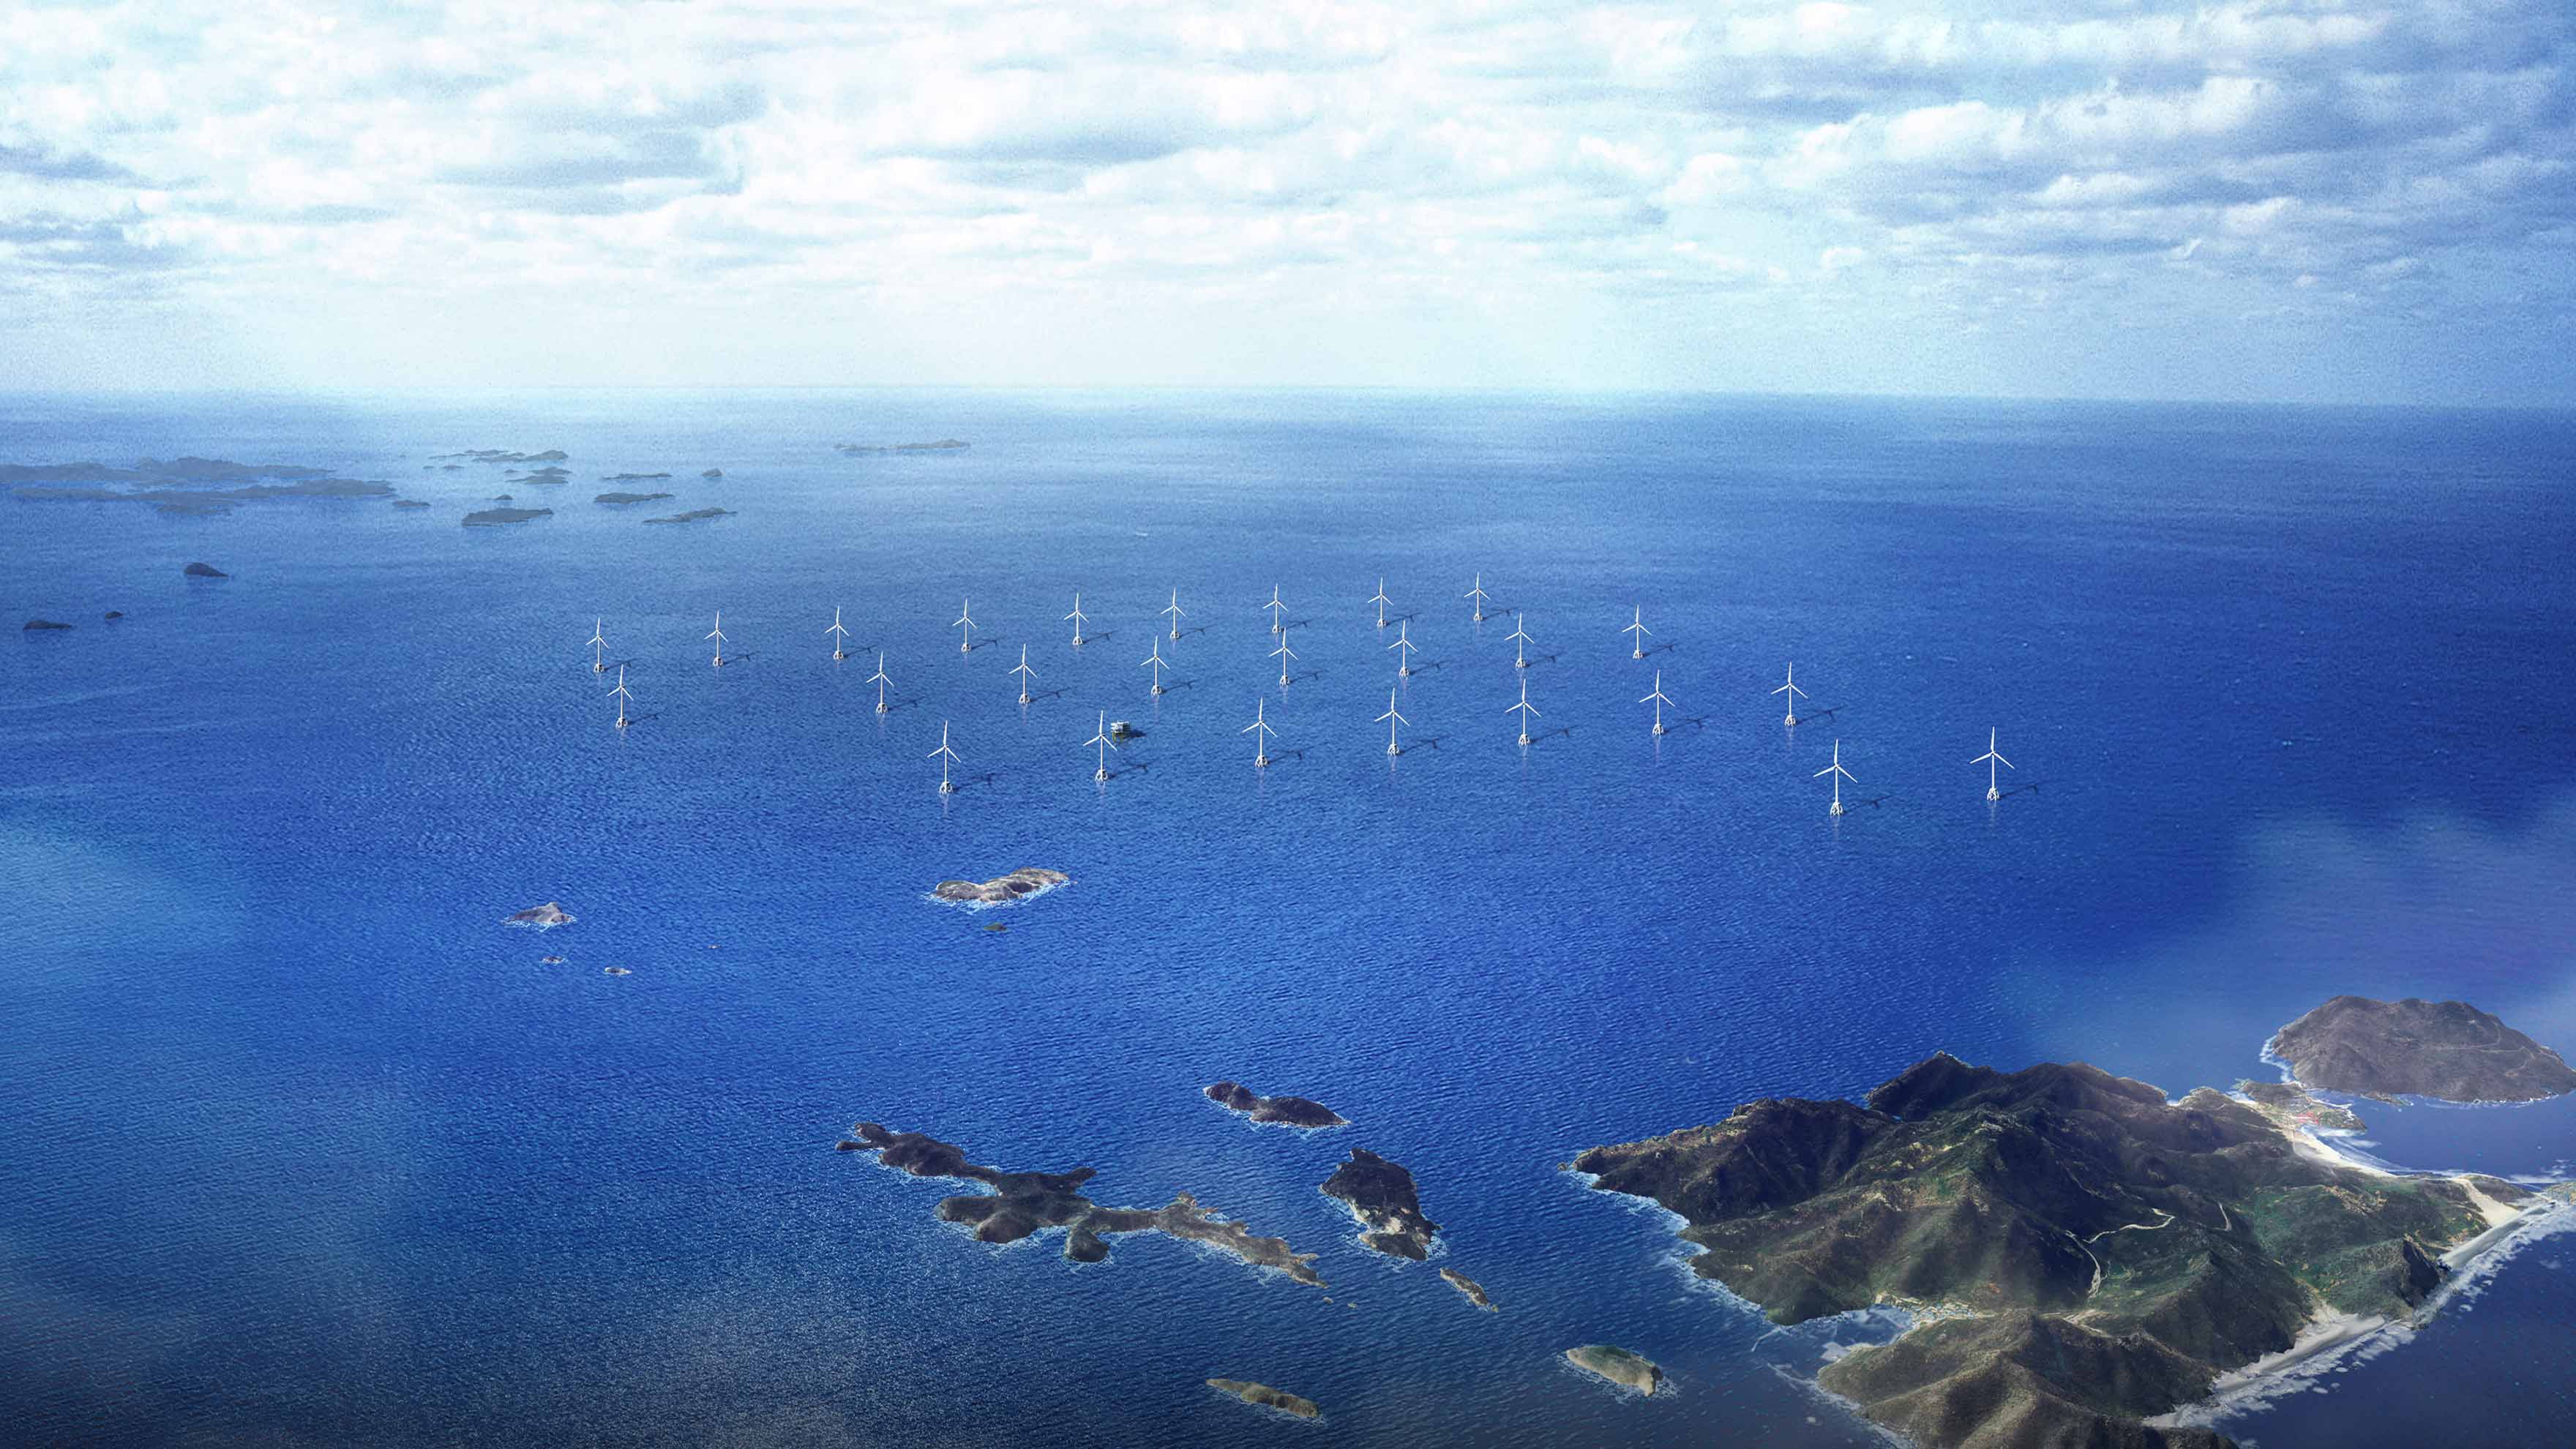 Hanwha developed the 400MW Shinan Ui offshore wind power project.